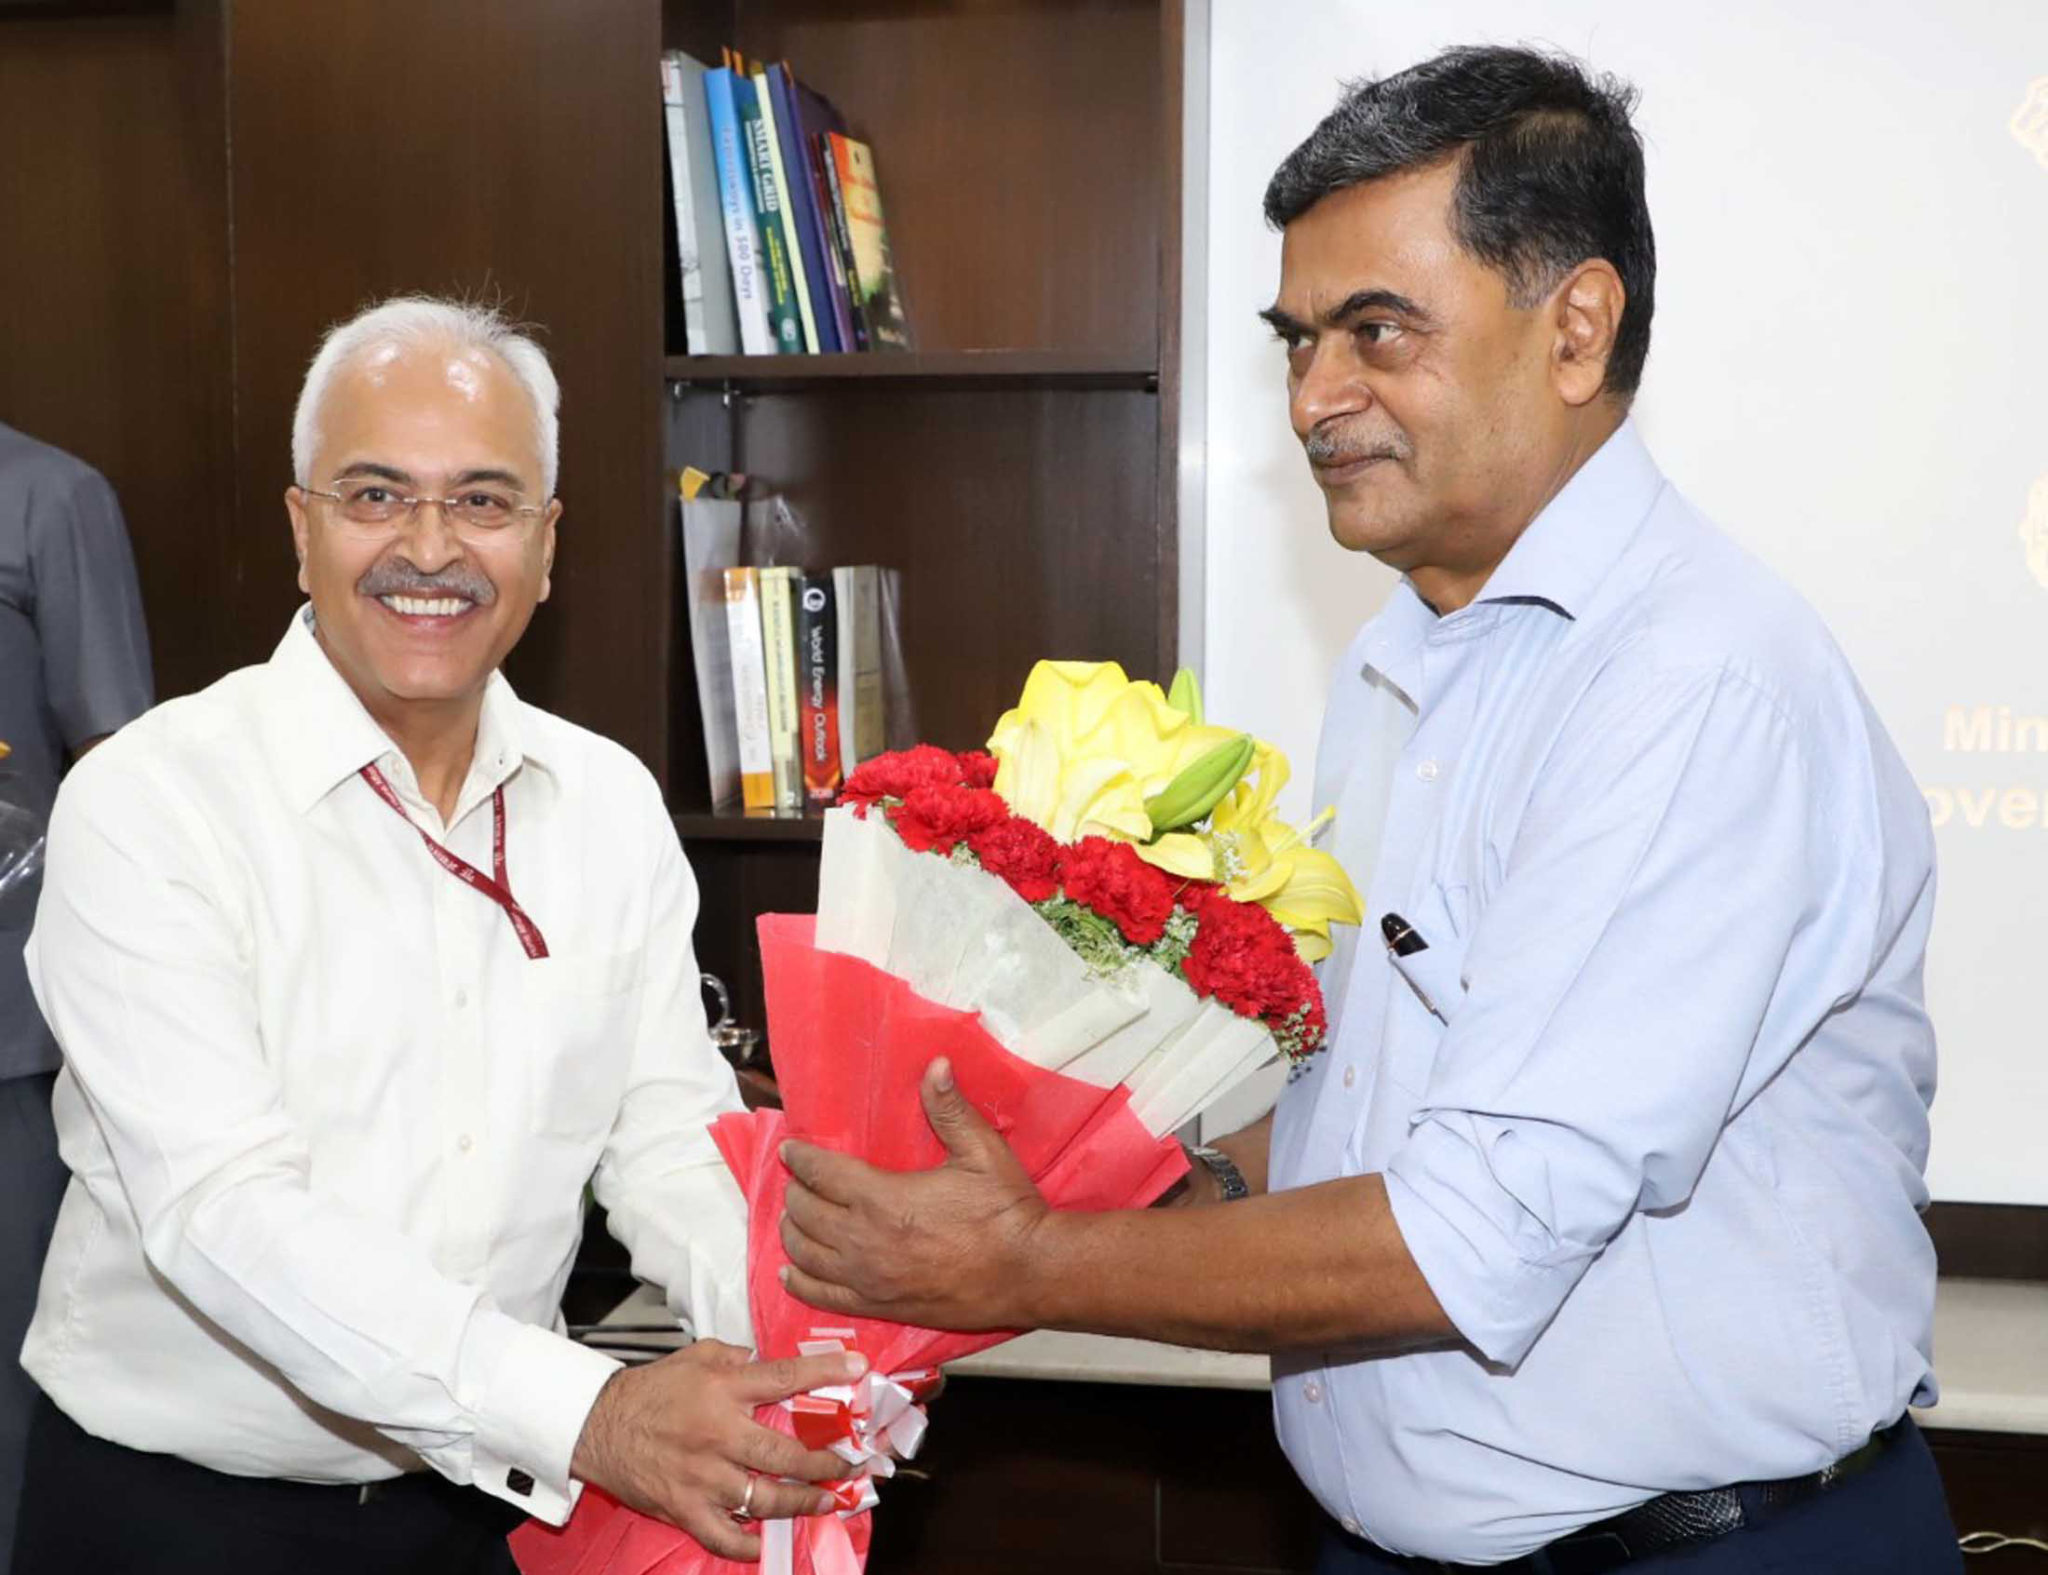 shri-rk-singh-takes-charge-of-the-ministries-of-the-power-and-new-renewable-energy